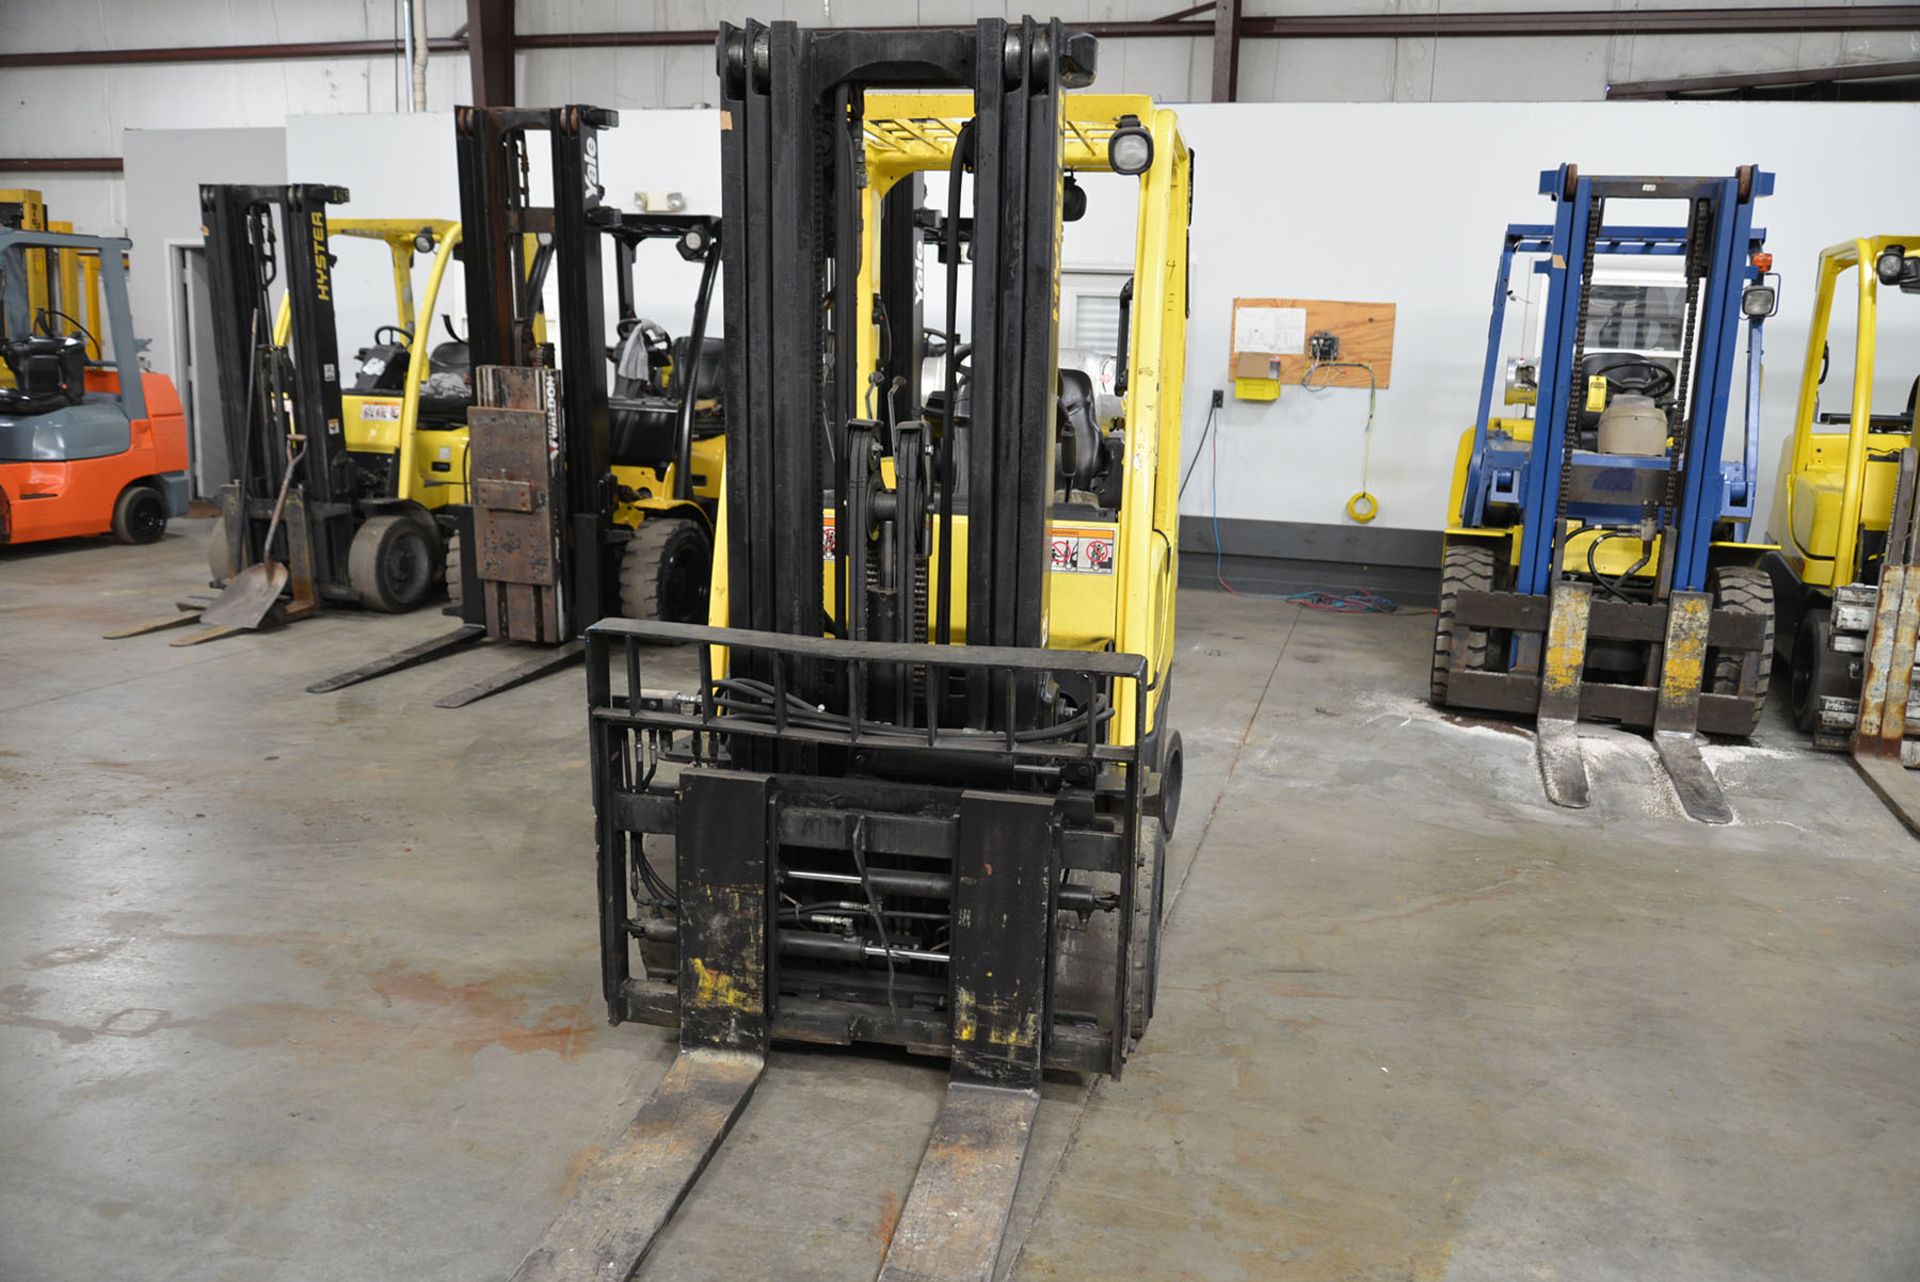 2009 HYSTER 7,000-LB., MODEL: S70FT, SN: F187V14683G, LPG, SOLID TIRES, 3-STAGE MAST, 182'' LIFT - Image 2 of 6